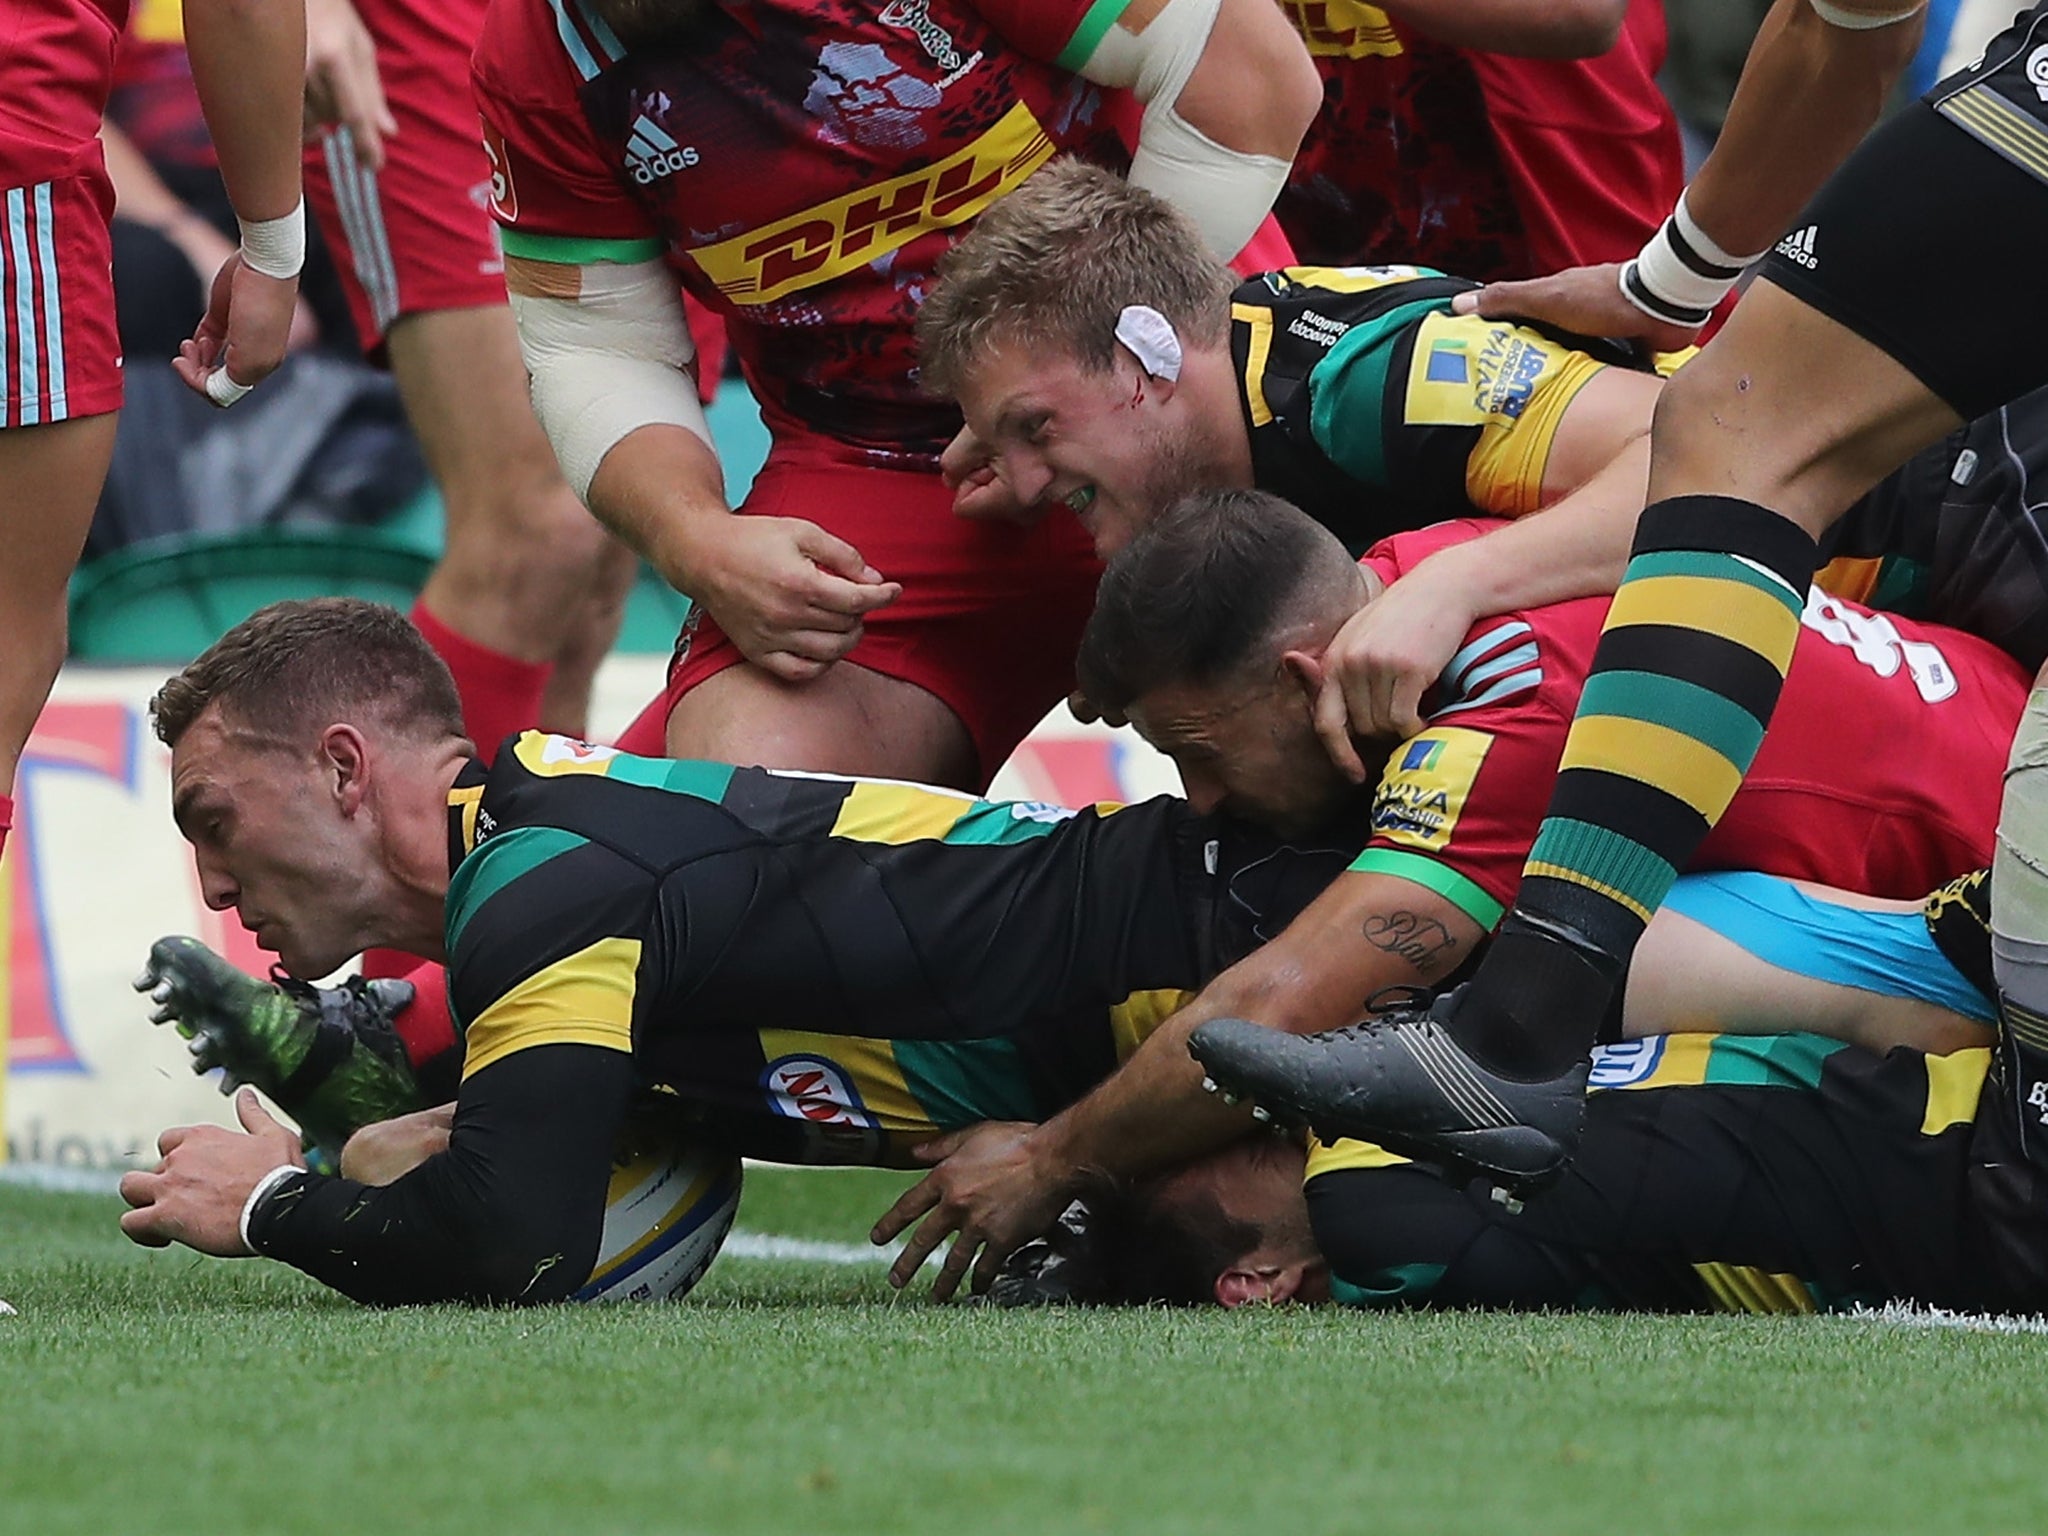 George North scored a try as Northampton Saints beat Harlequins 30-22